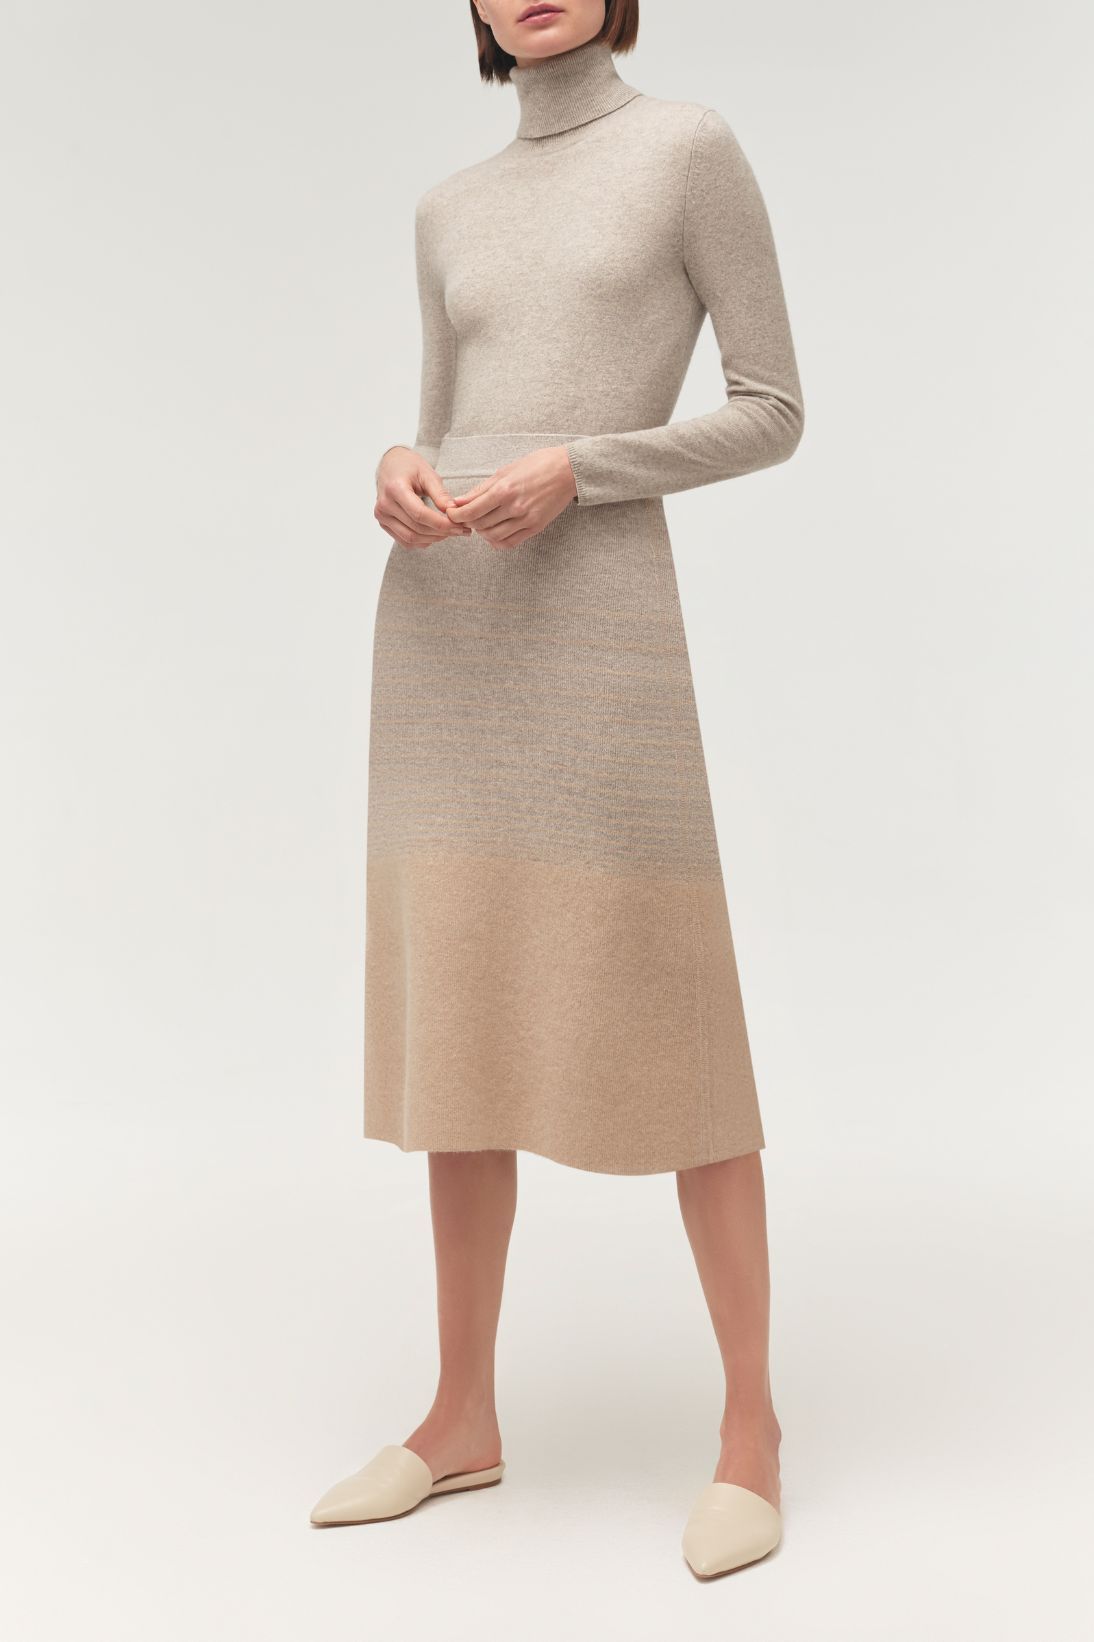 DOUBLE KNIT A-LINE SKIRT